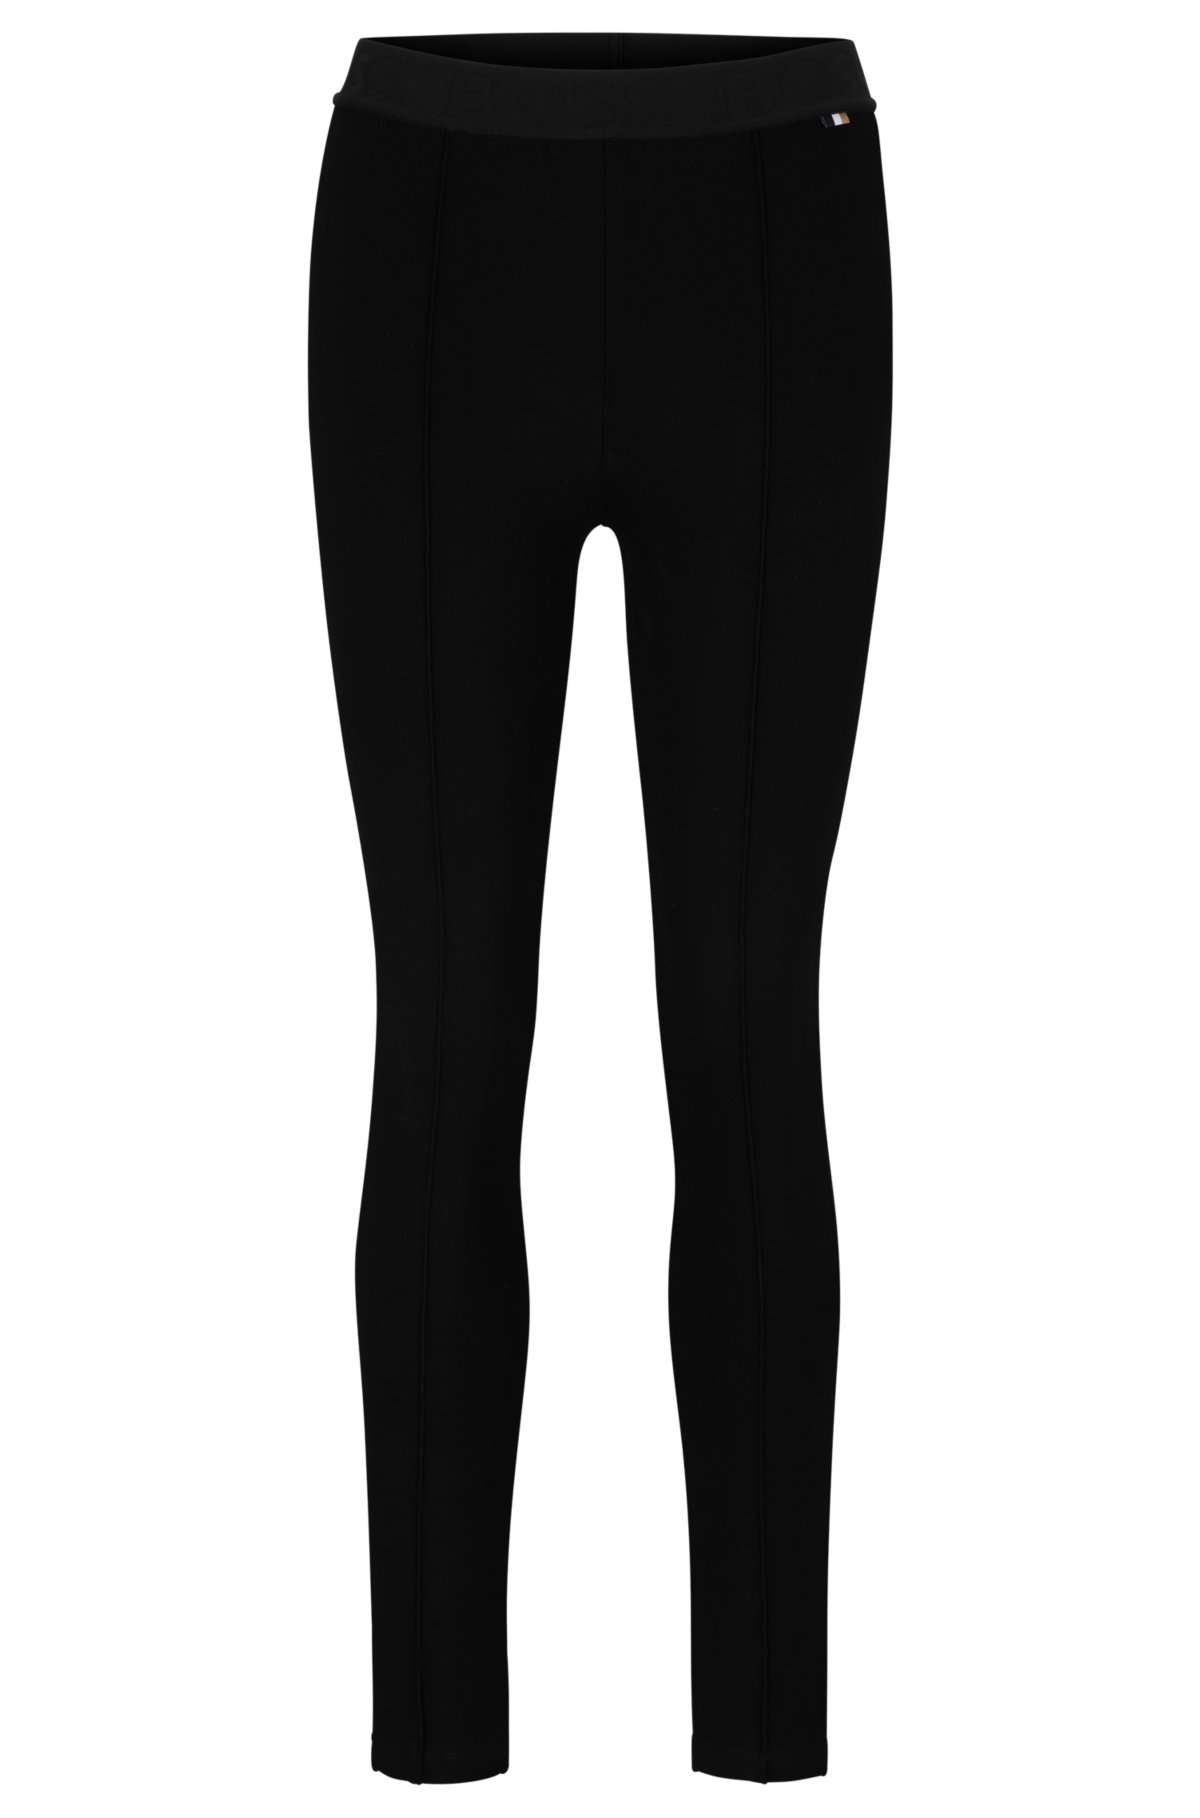 Slim-fit leggings in stretch jersey with logo waistband